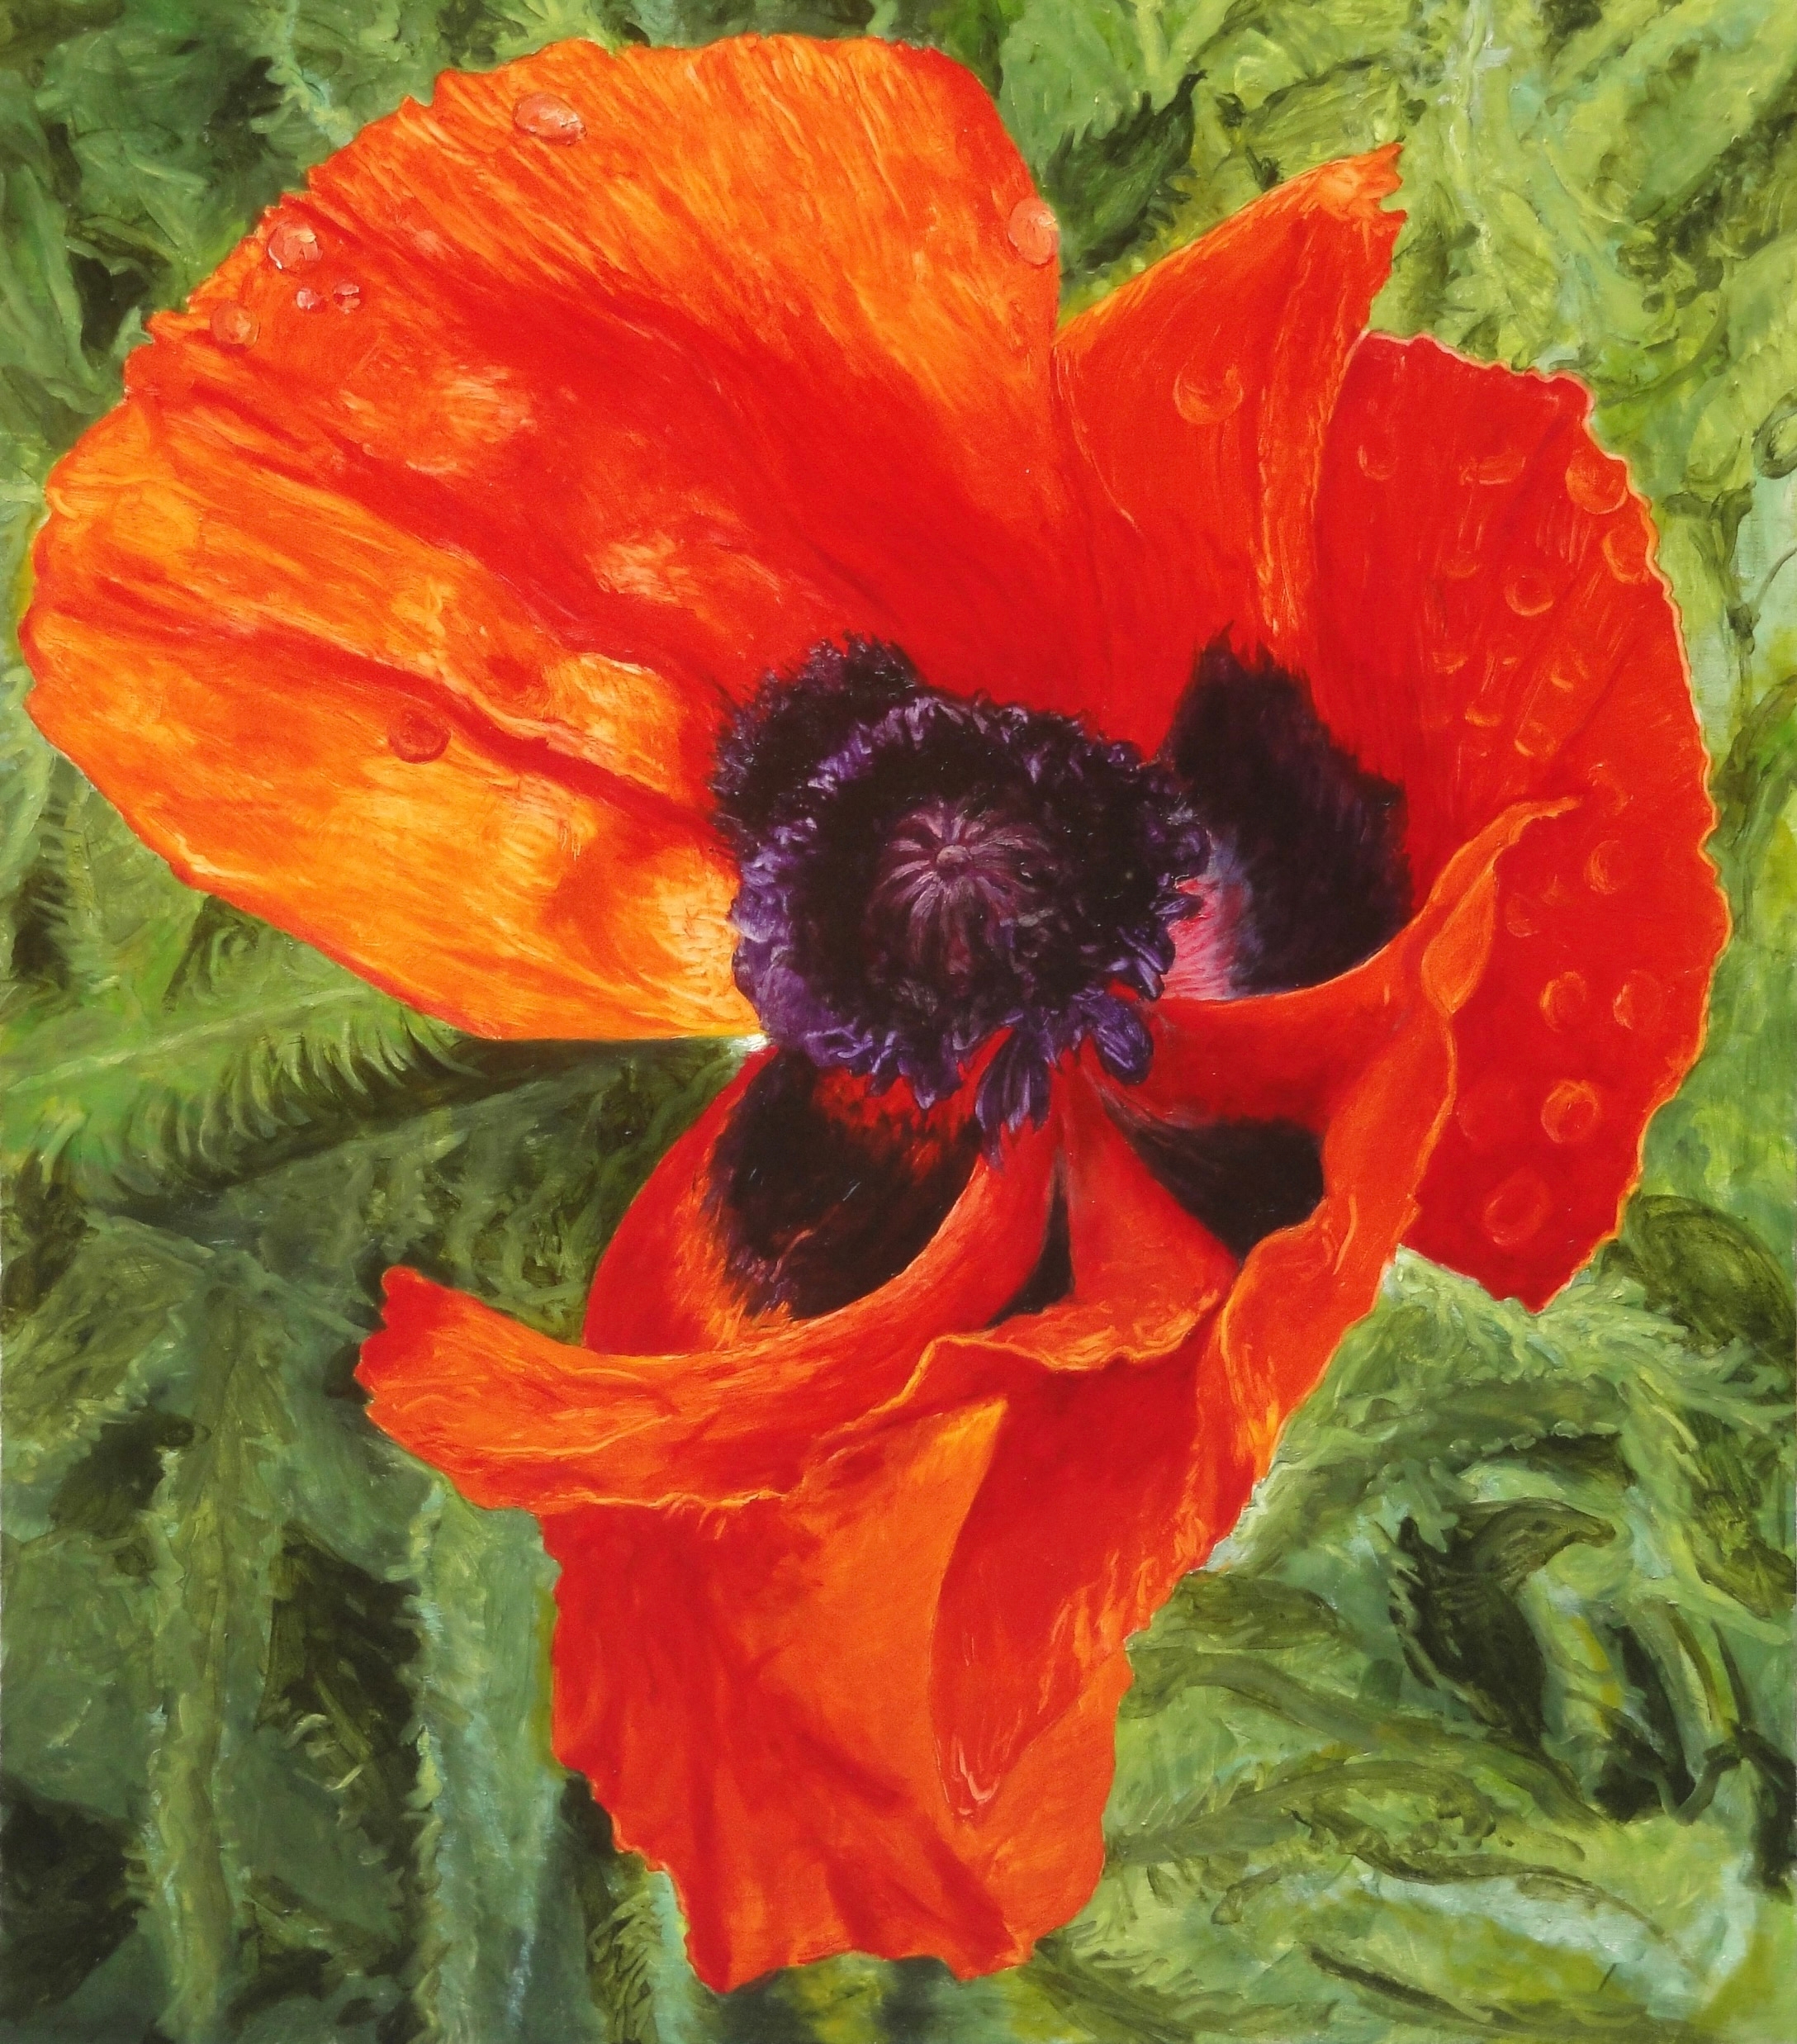 Donald Shambroom's painting from the Collection called Blossom depicting a Poppy